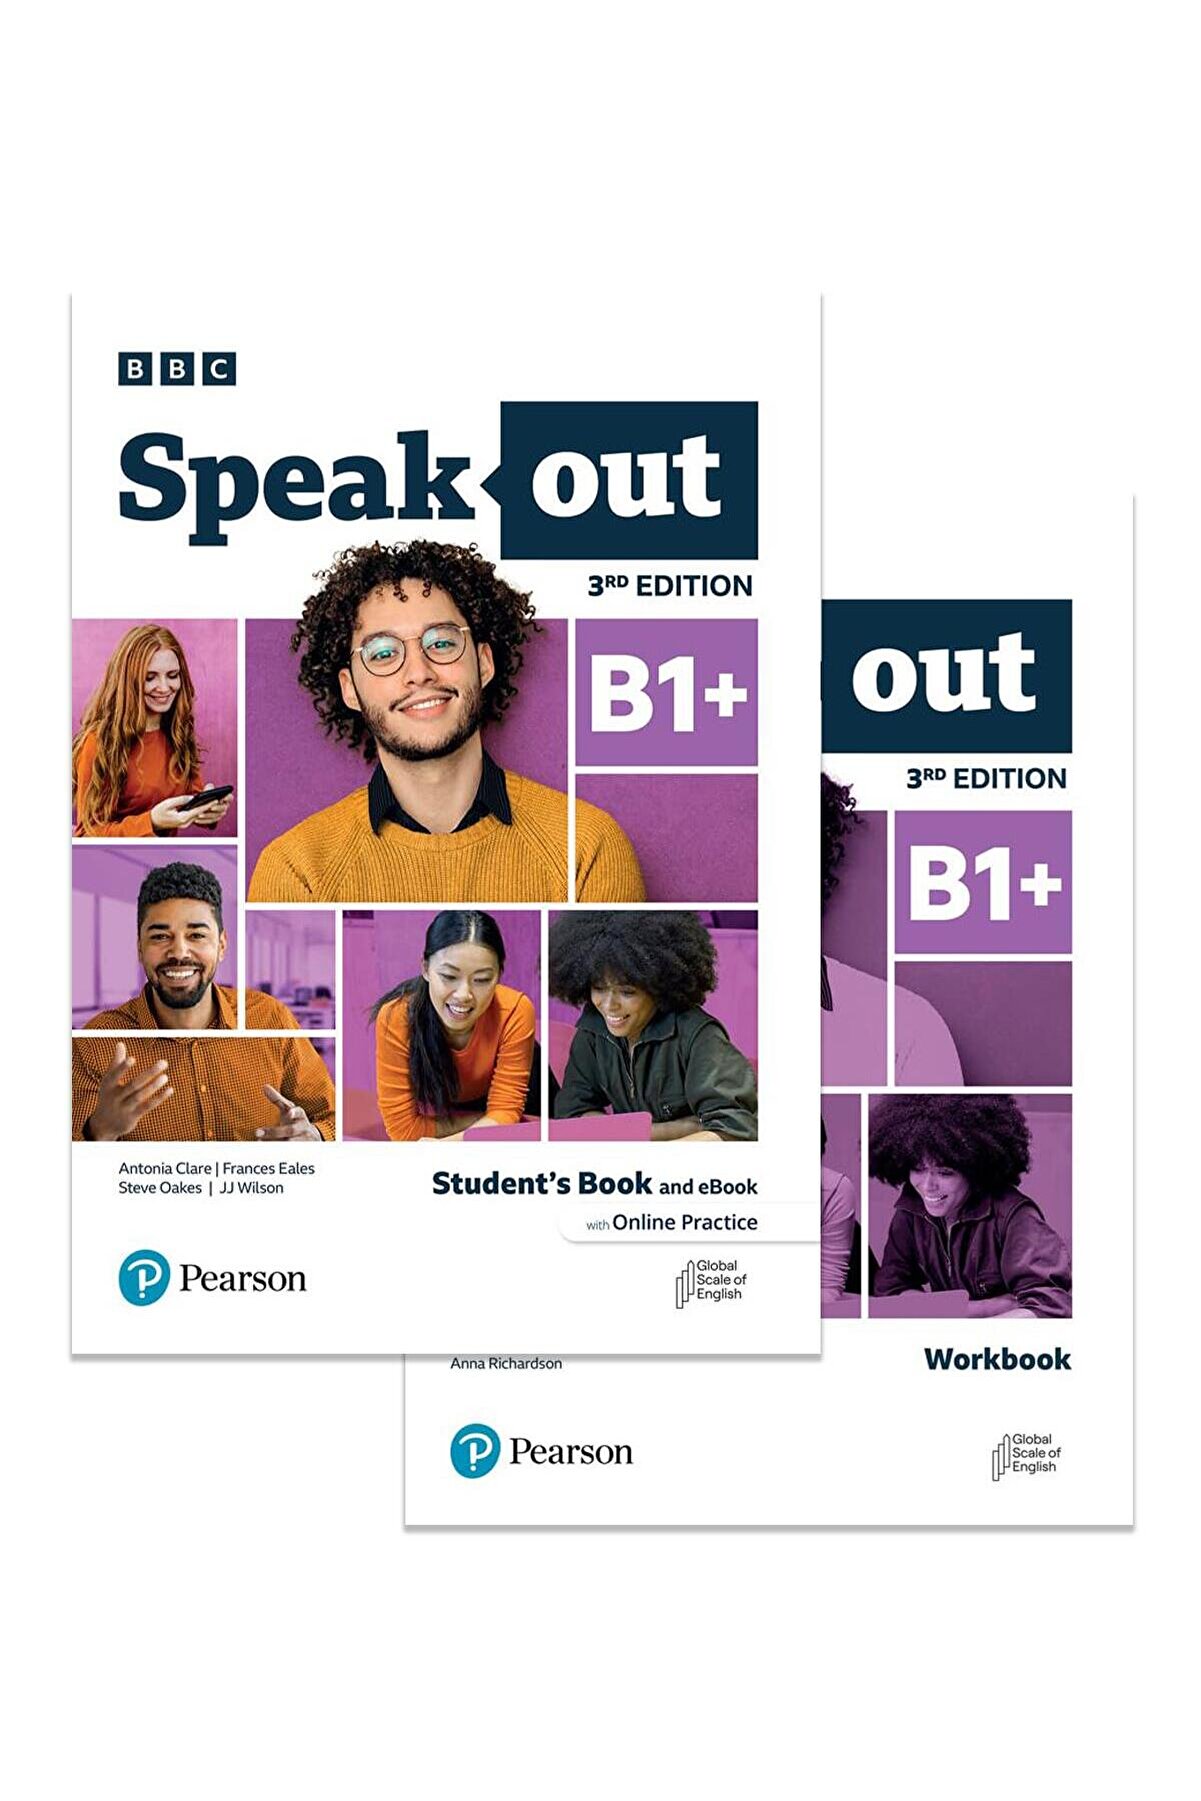 Pearson Speakout B1+ Student Book and eBook with Online Practice + Workbook with Key (3rd Edition)